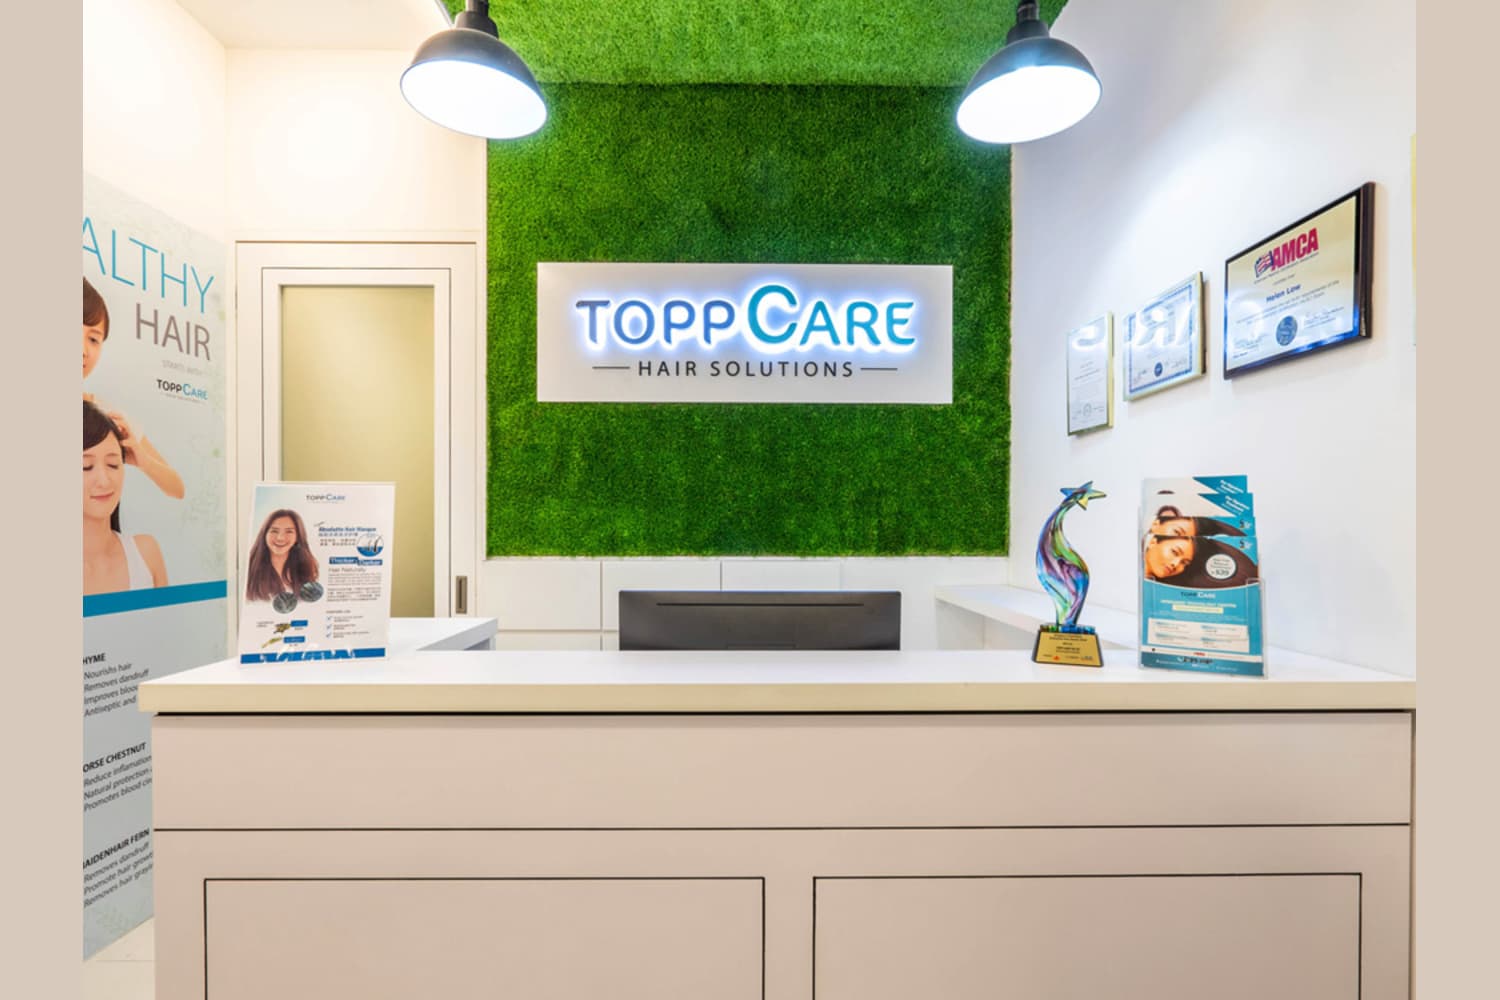 6-step Customised revitalising hair treatment for 1 Person (1 Session) - limited stock at Topp Care Hair Solutions - Get Deals, Cashback and Rewards with ShopBack GO